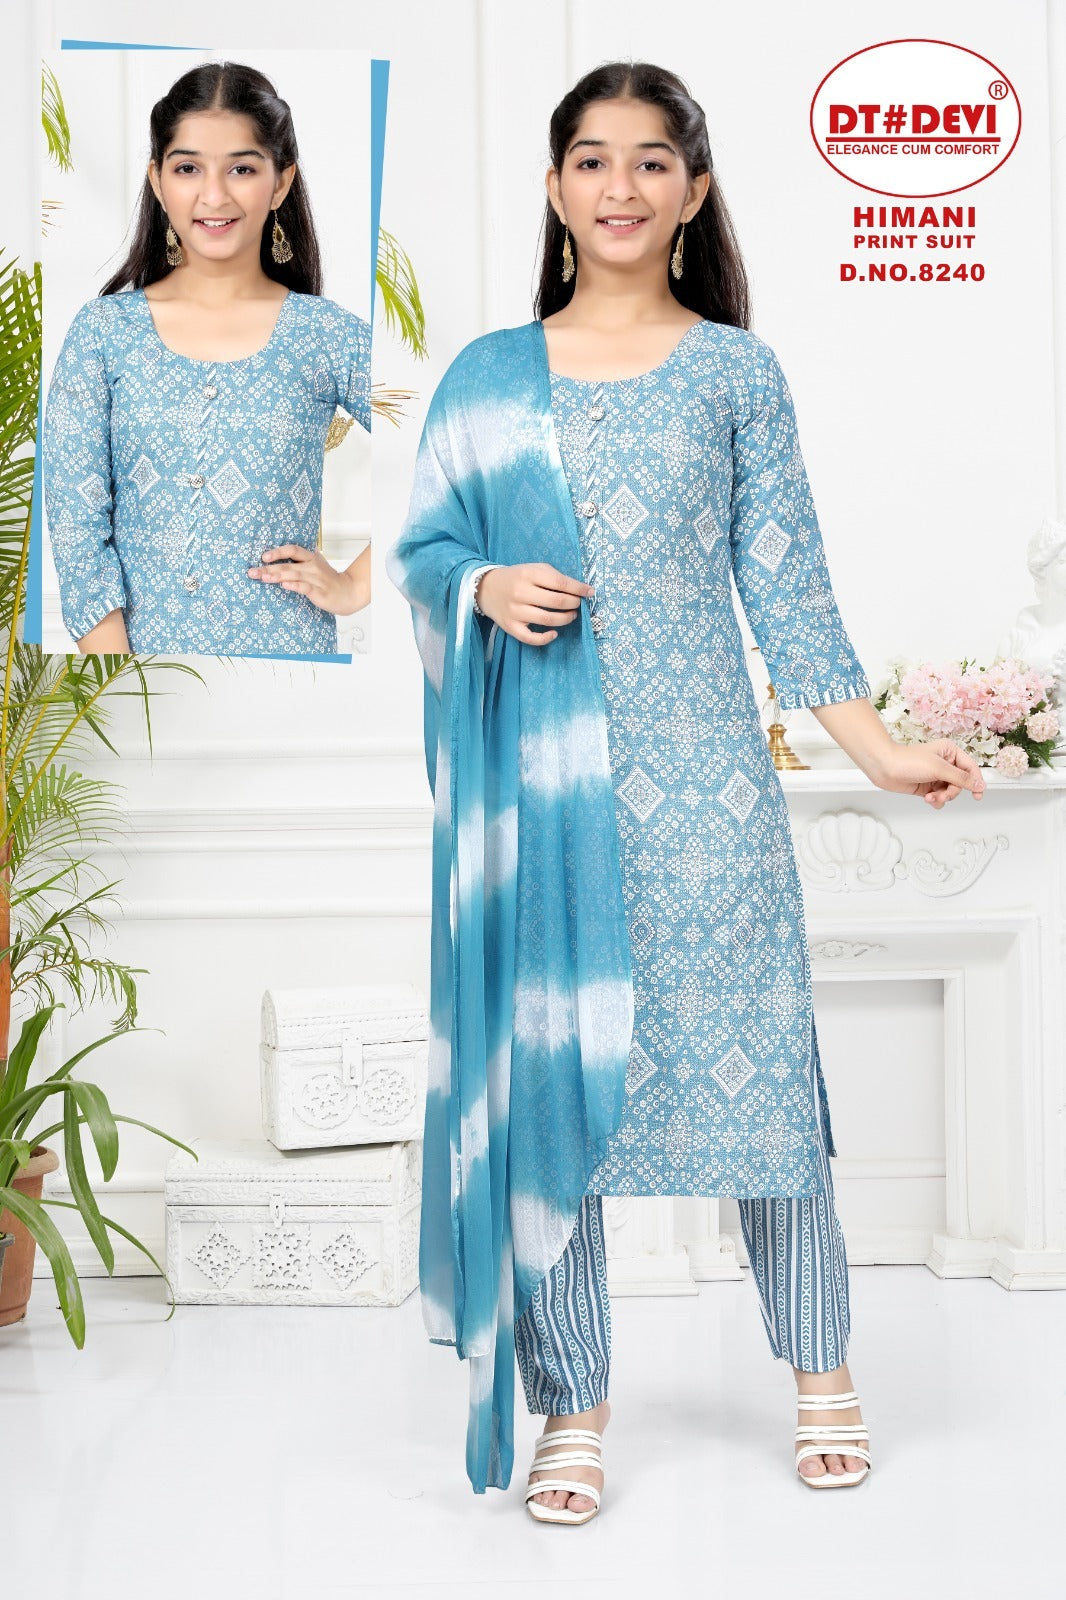 8240-Himani Dt Devi Rayon  Readymade Pant Style Suits